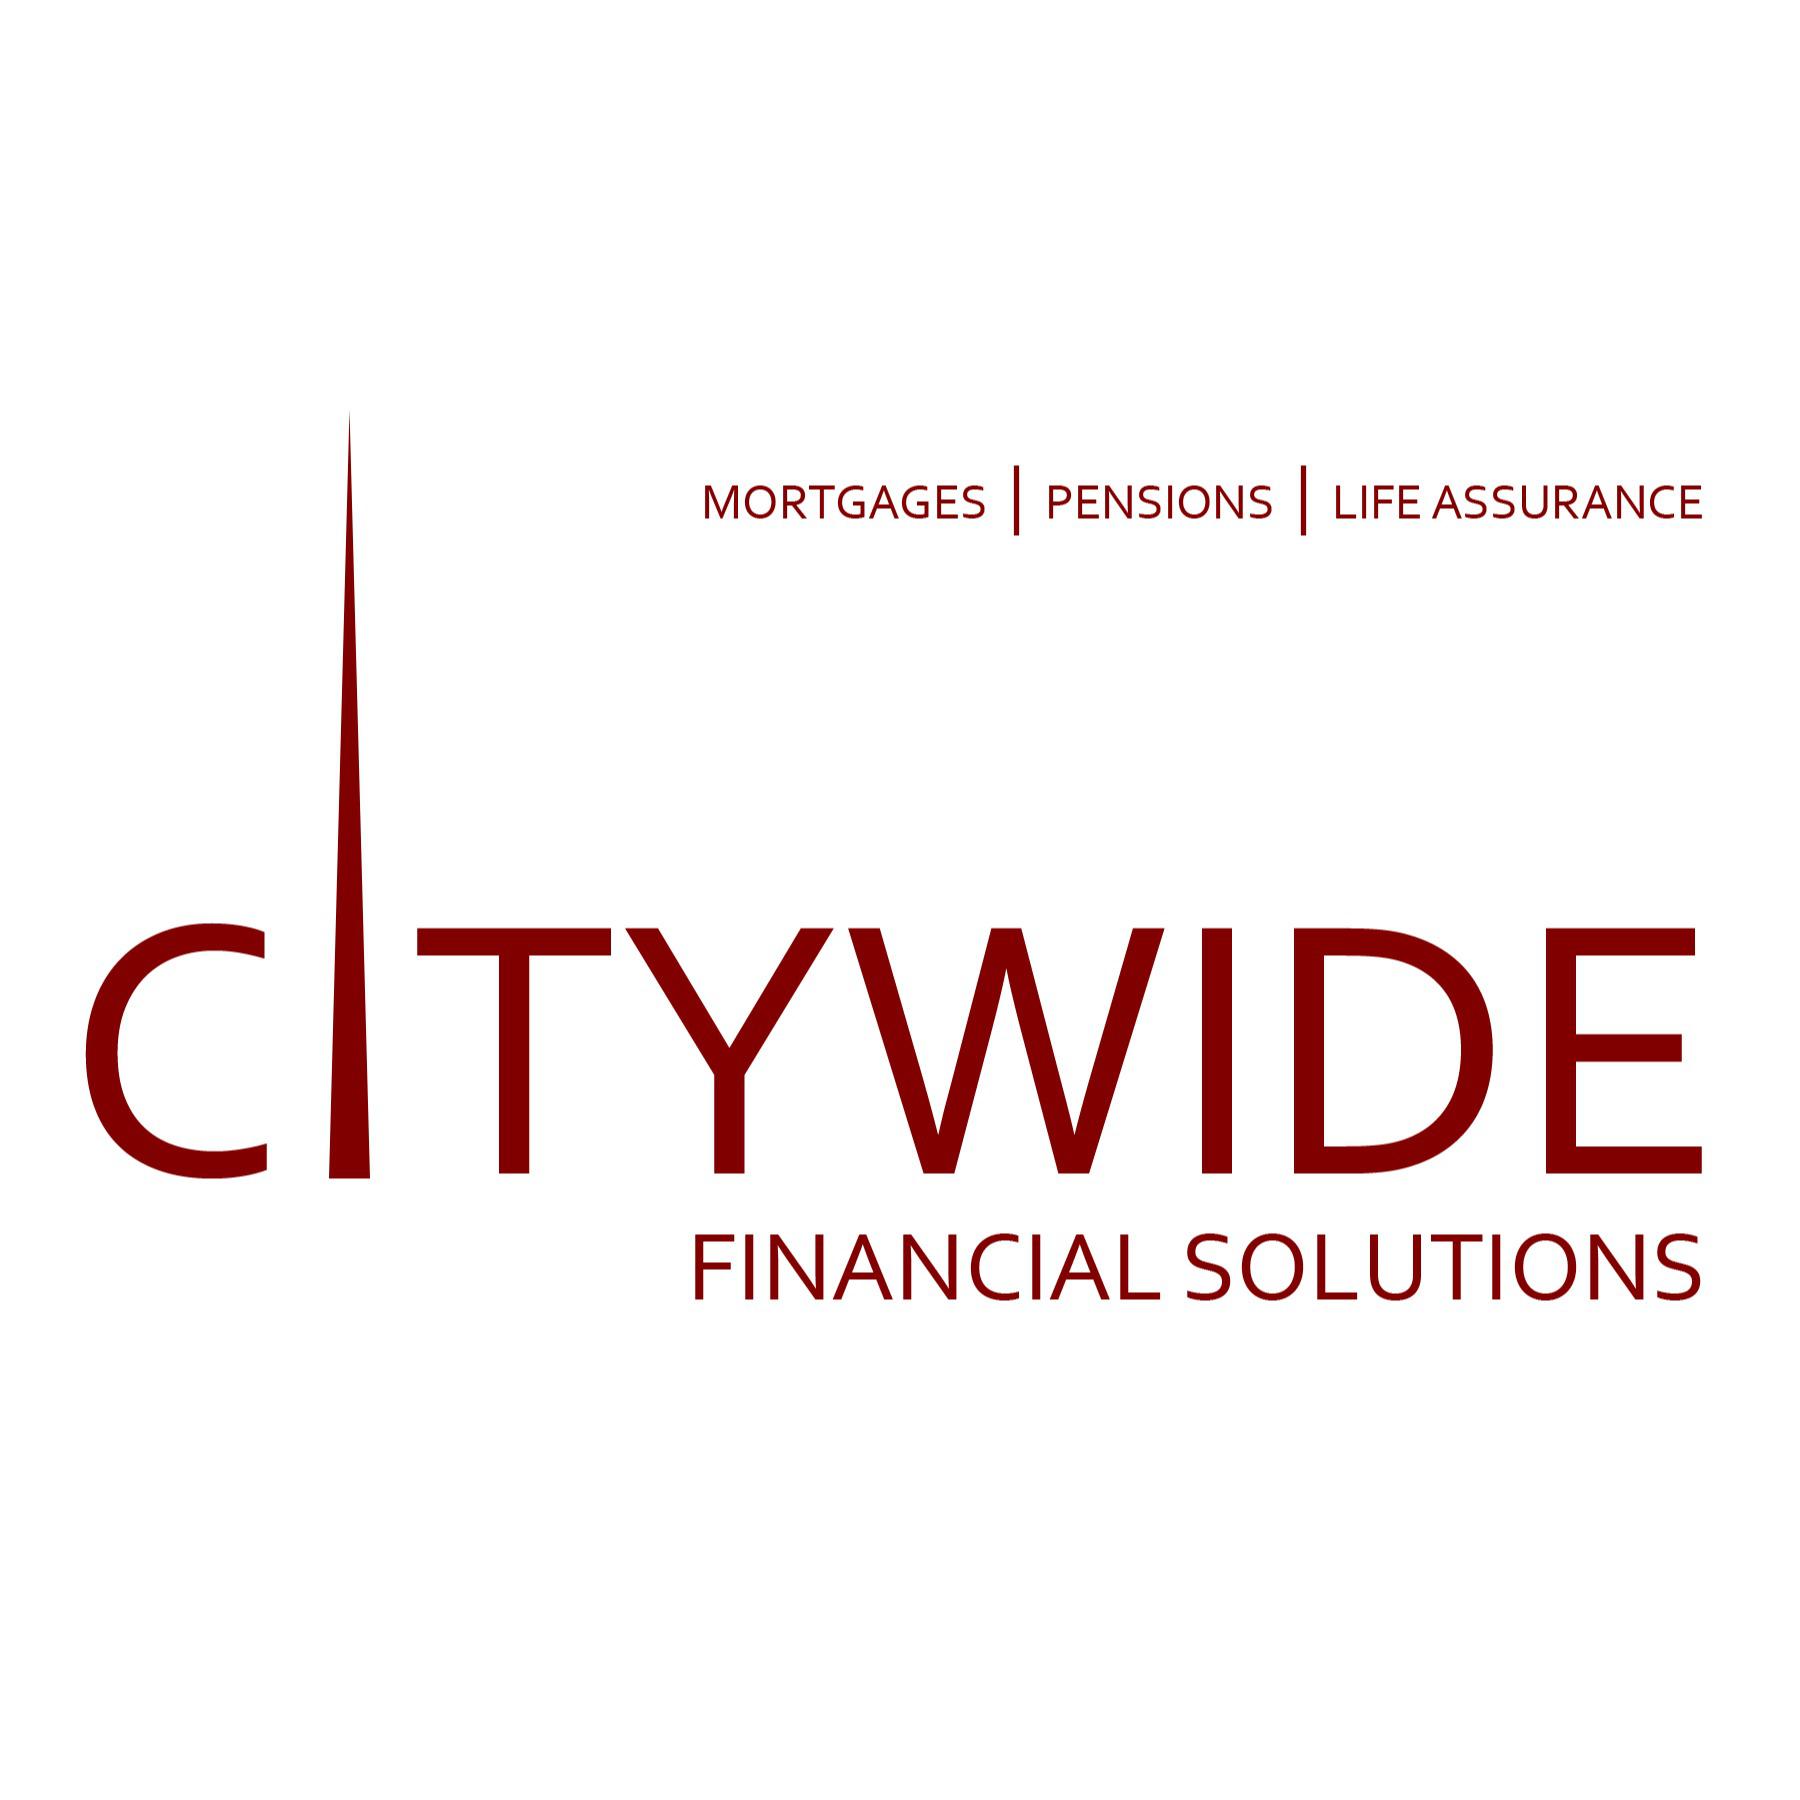 Citywide Financial Solutions